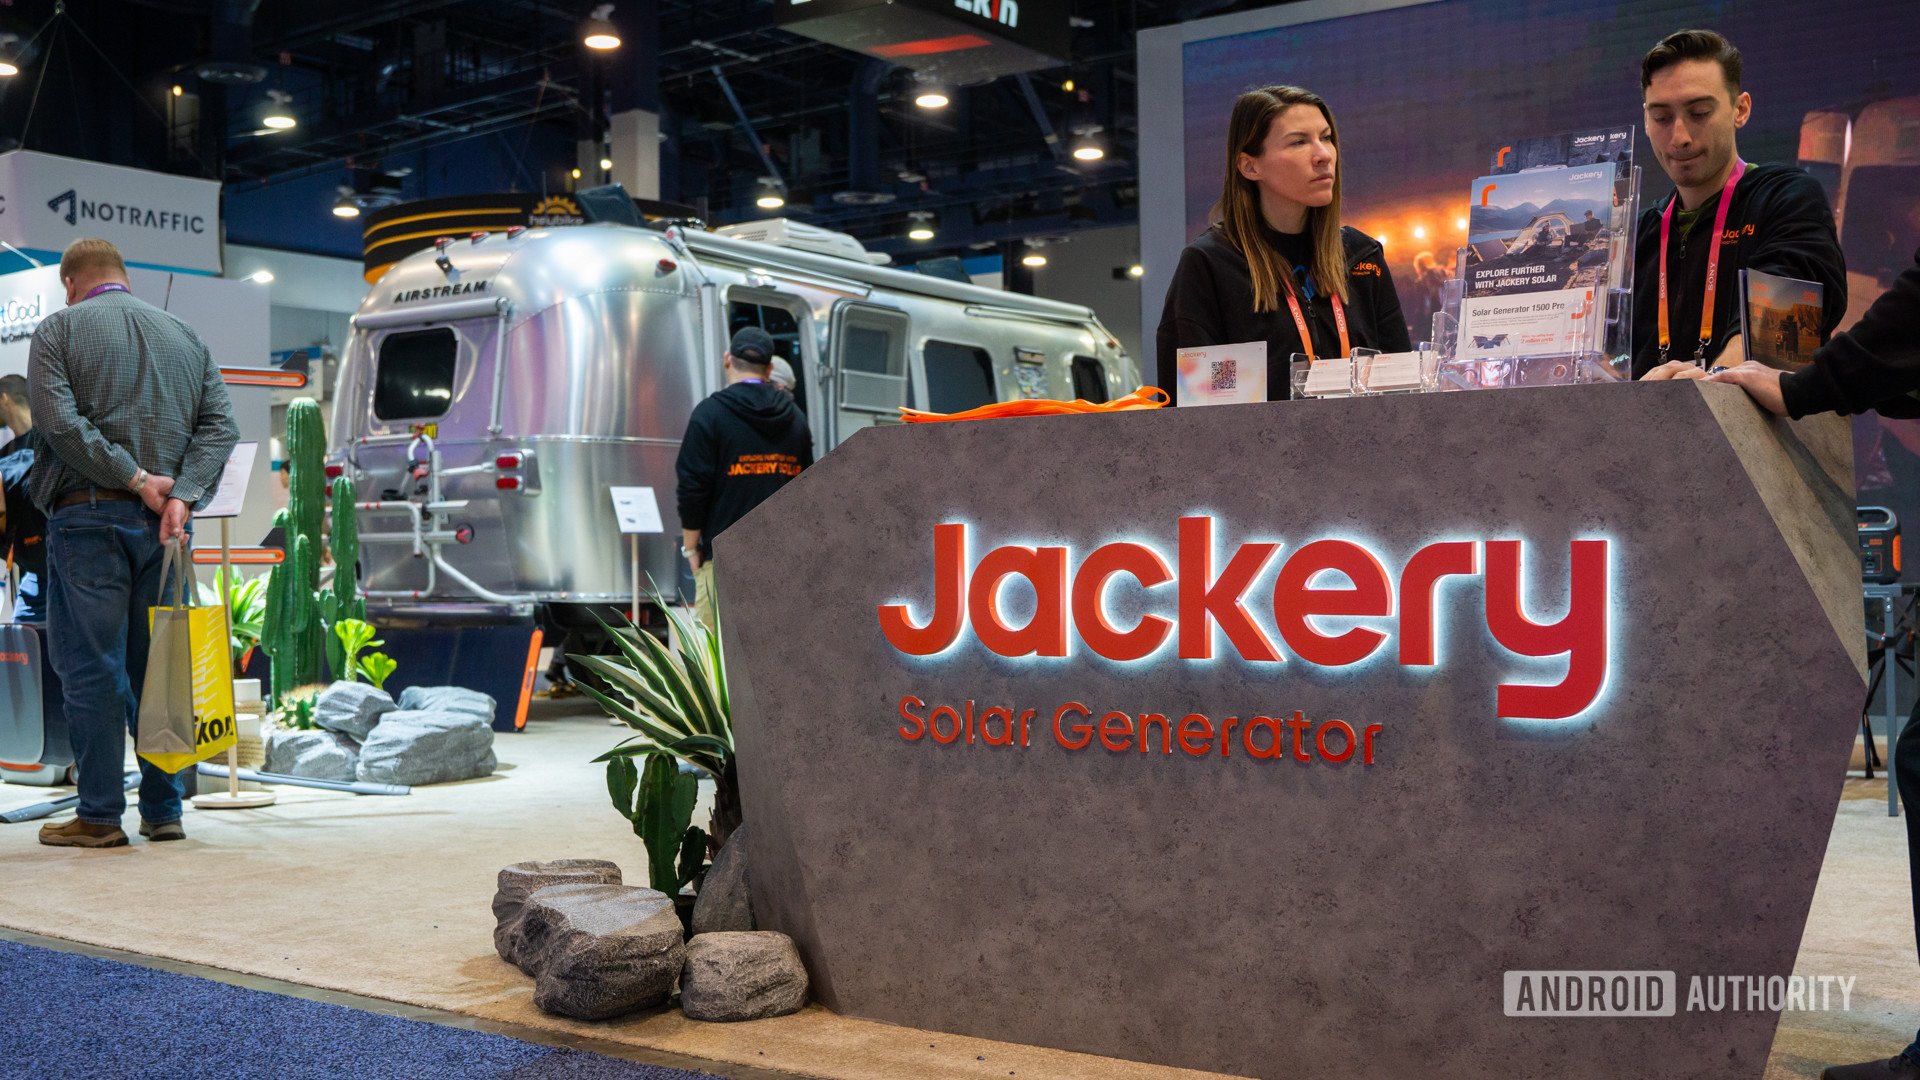 Jackery booth at CES 2023 2